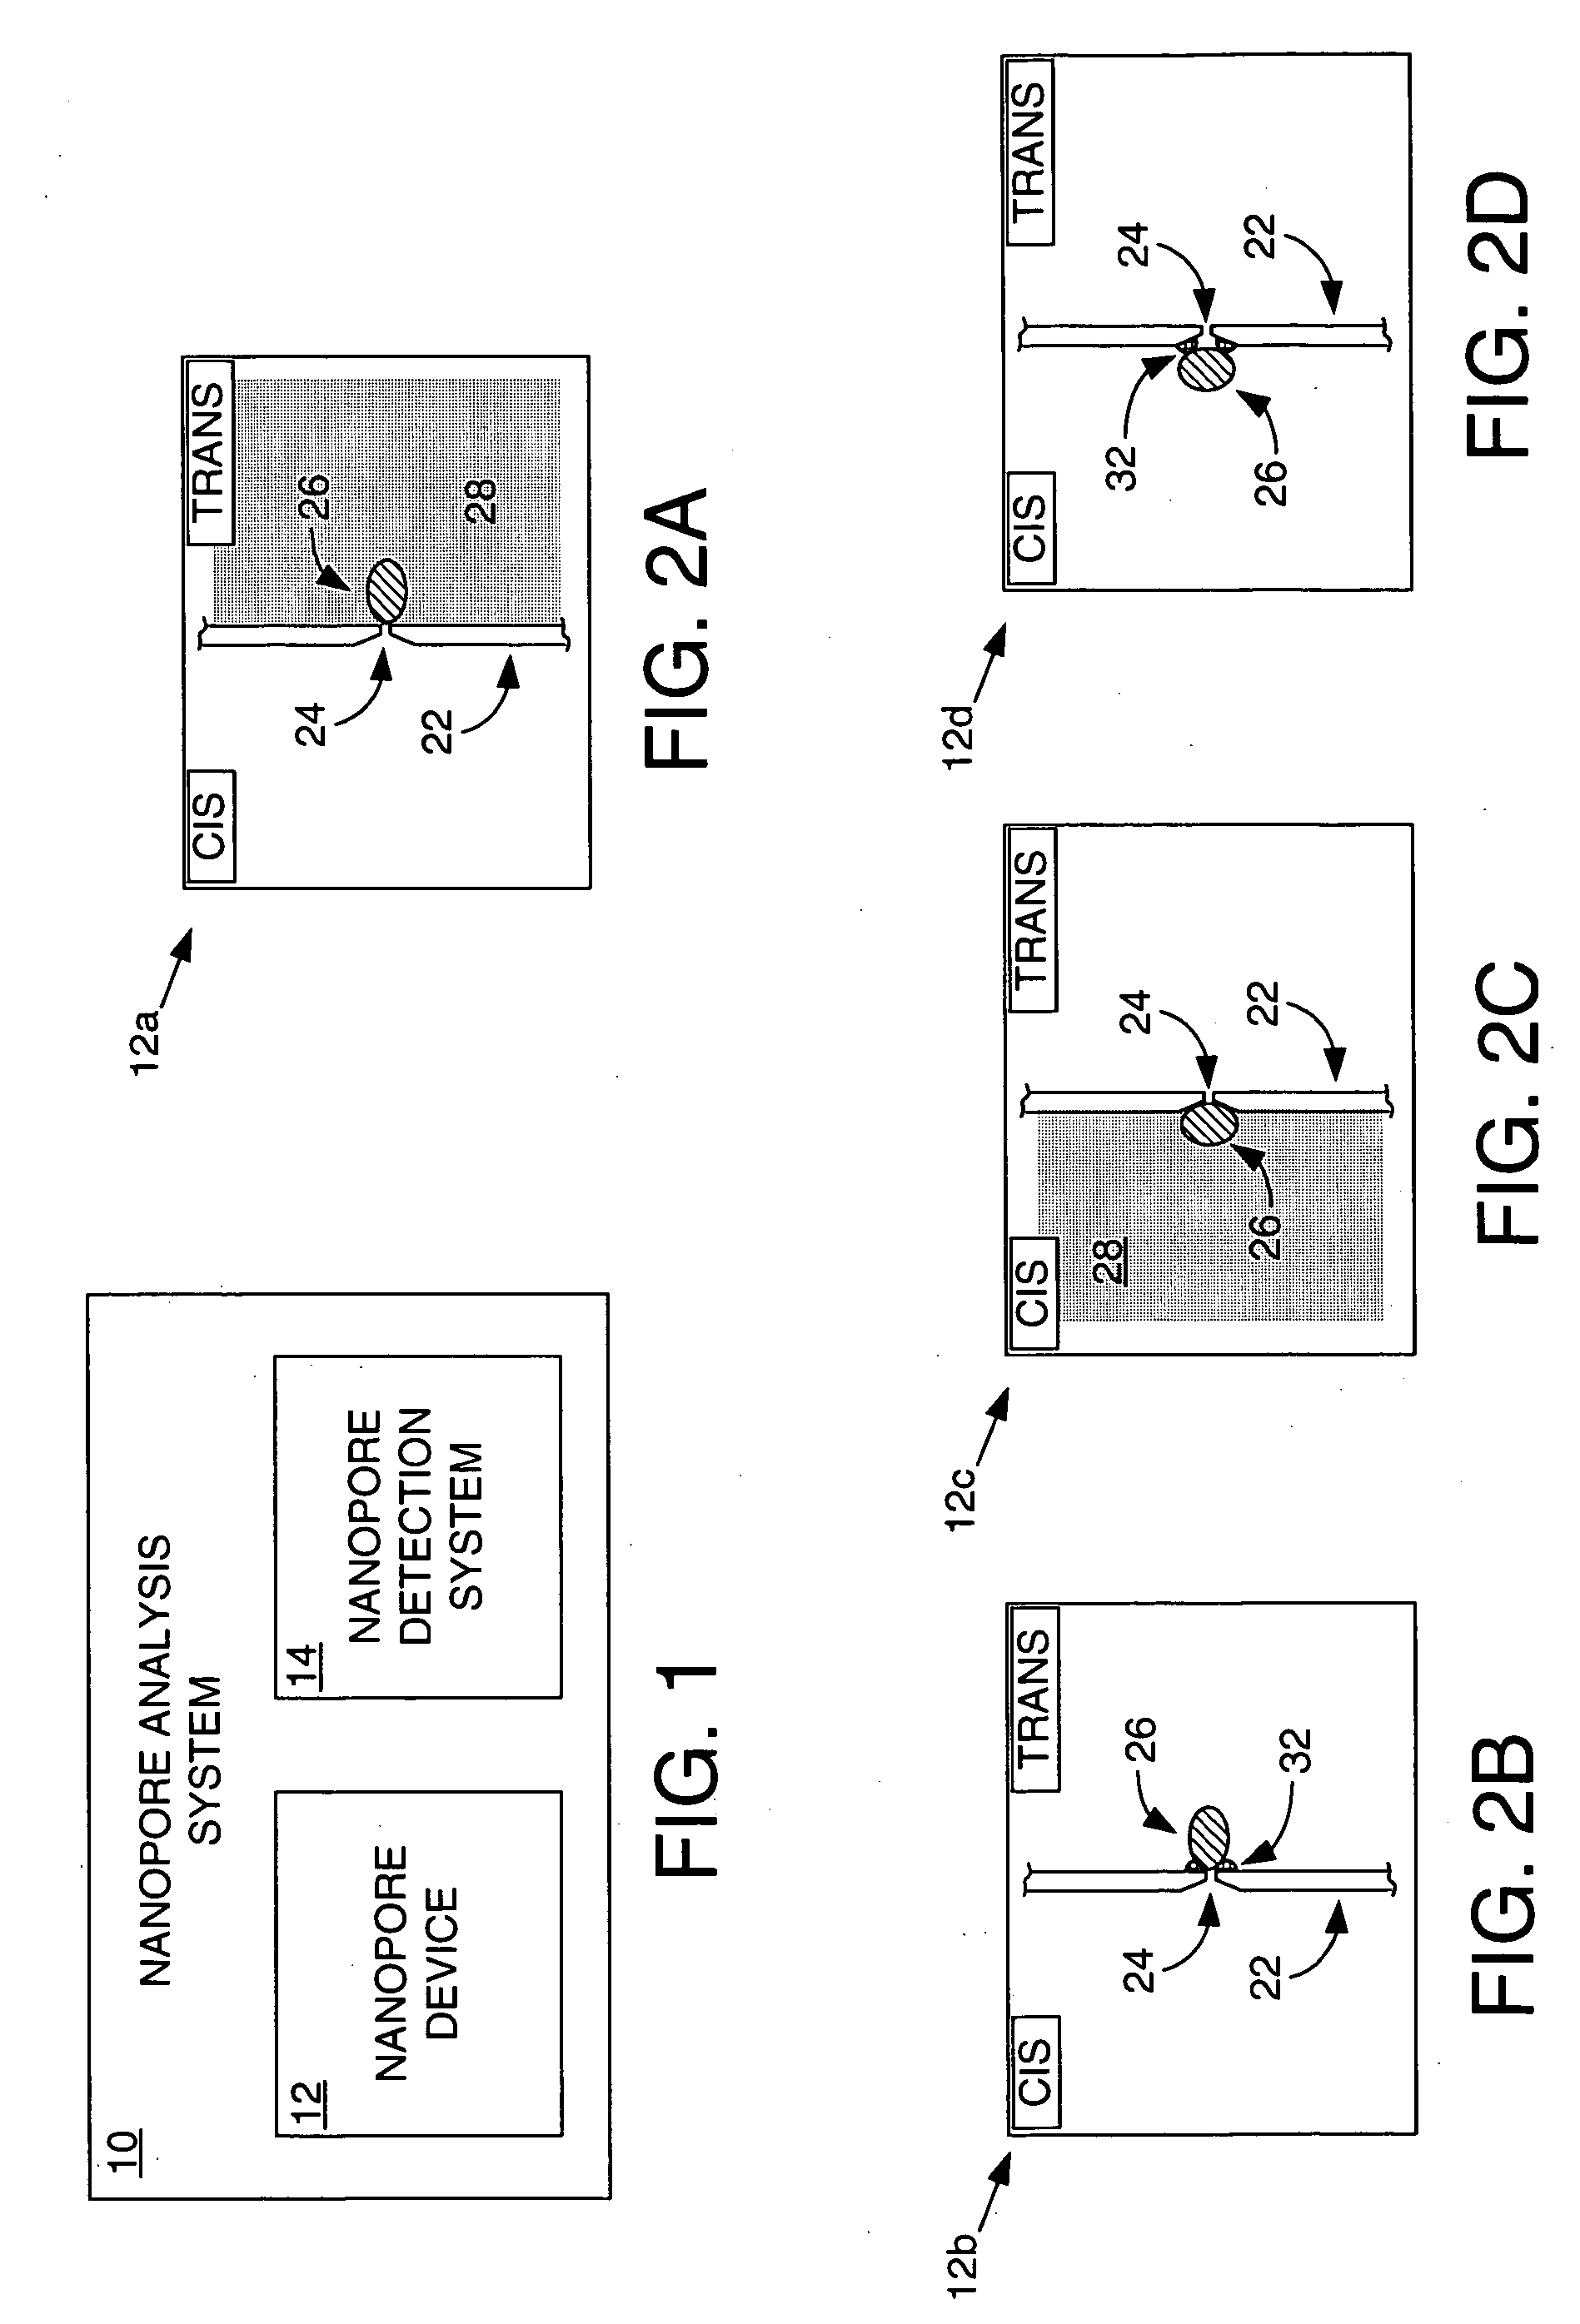 Methods and apparatus for characterizing polynucleotides